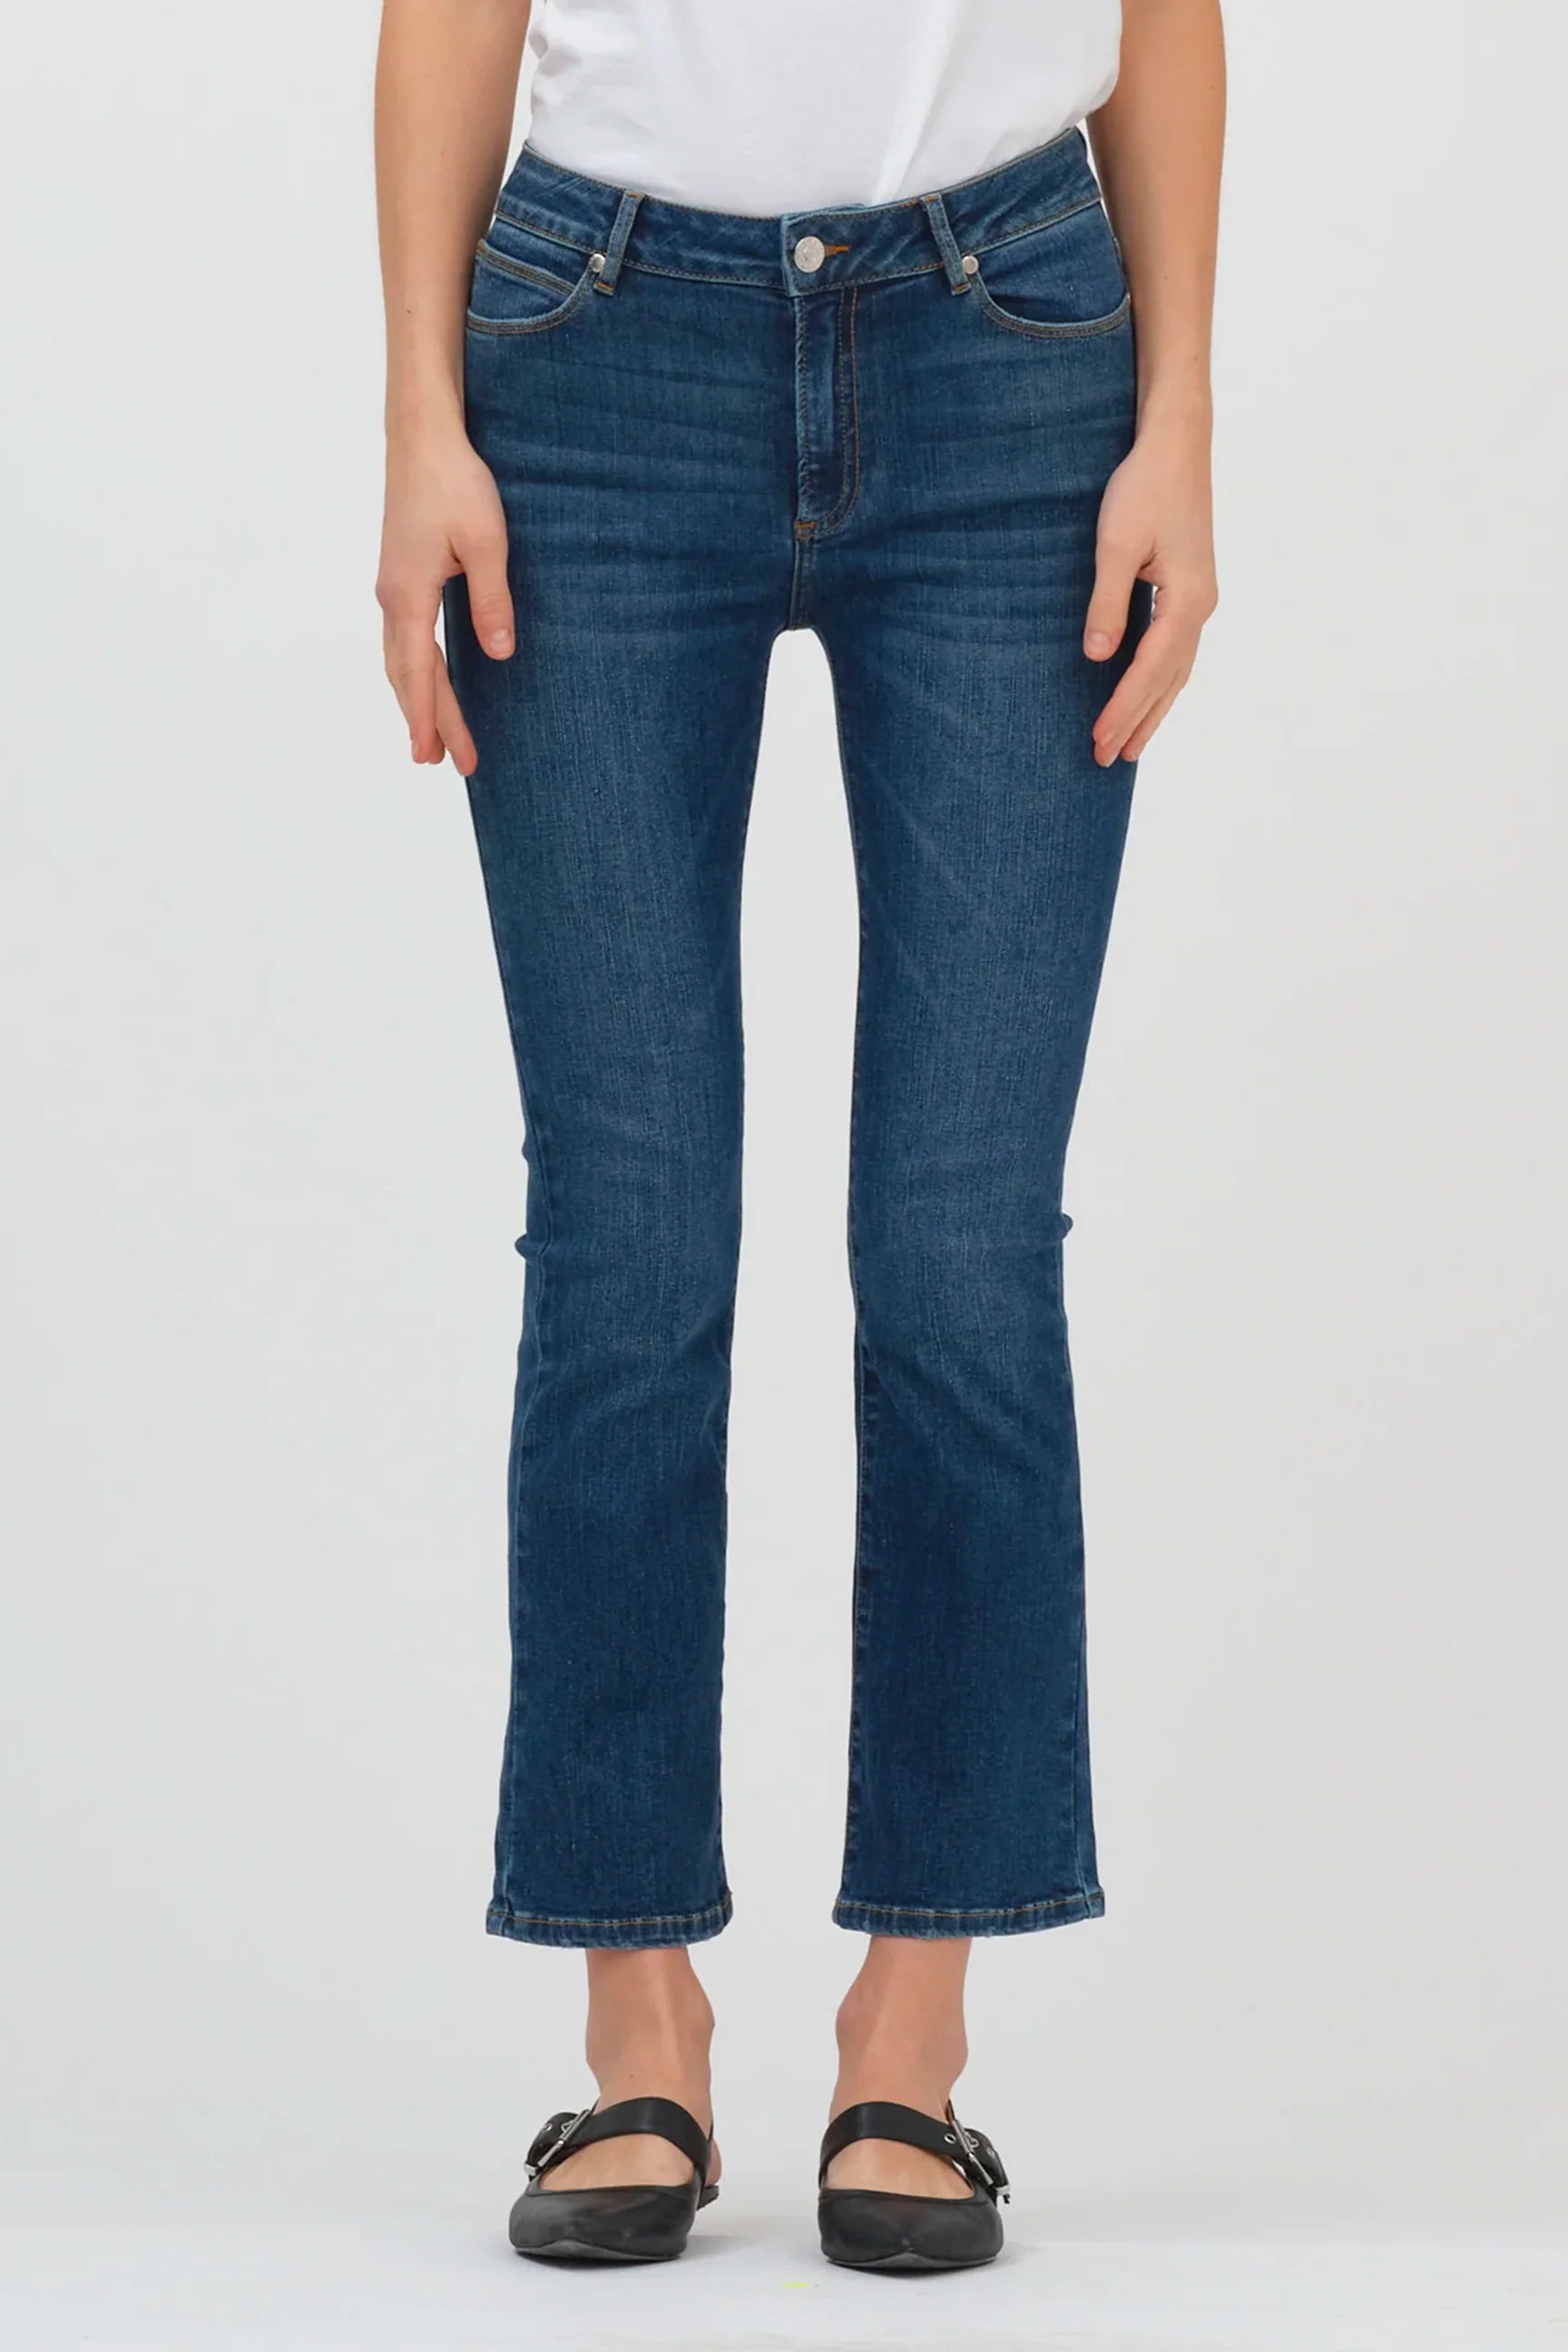 A woman wearing a pair of Malcolm Jeans - Denver kick flare leg jeans made from stretchy fabric by Tomorrow Denim.